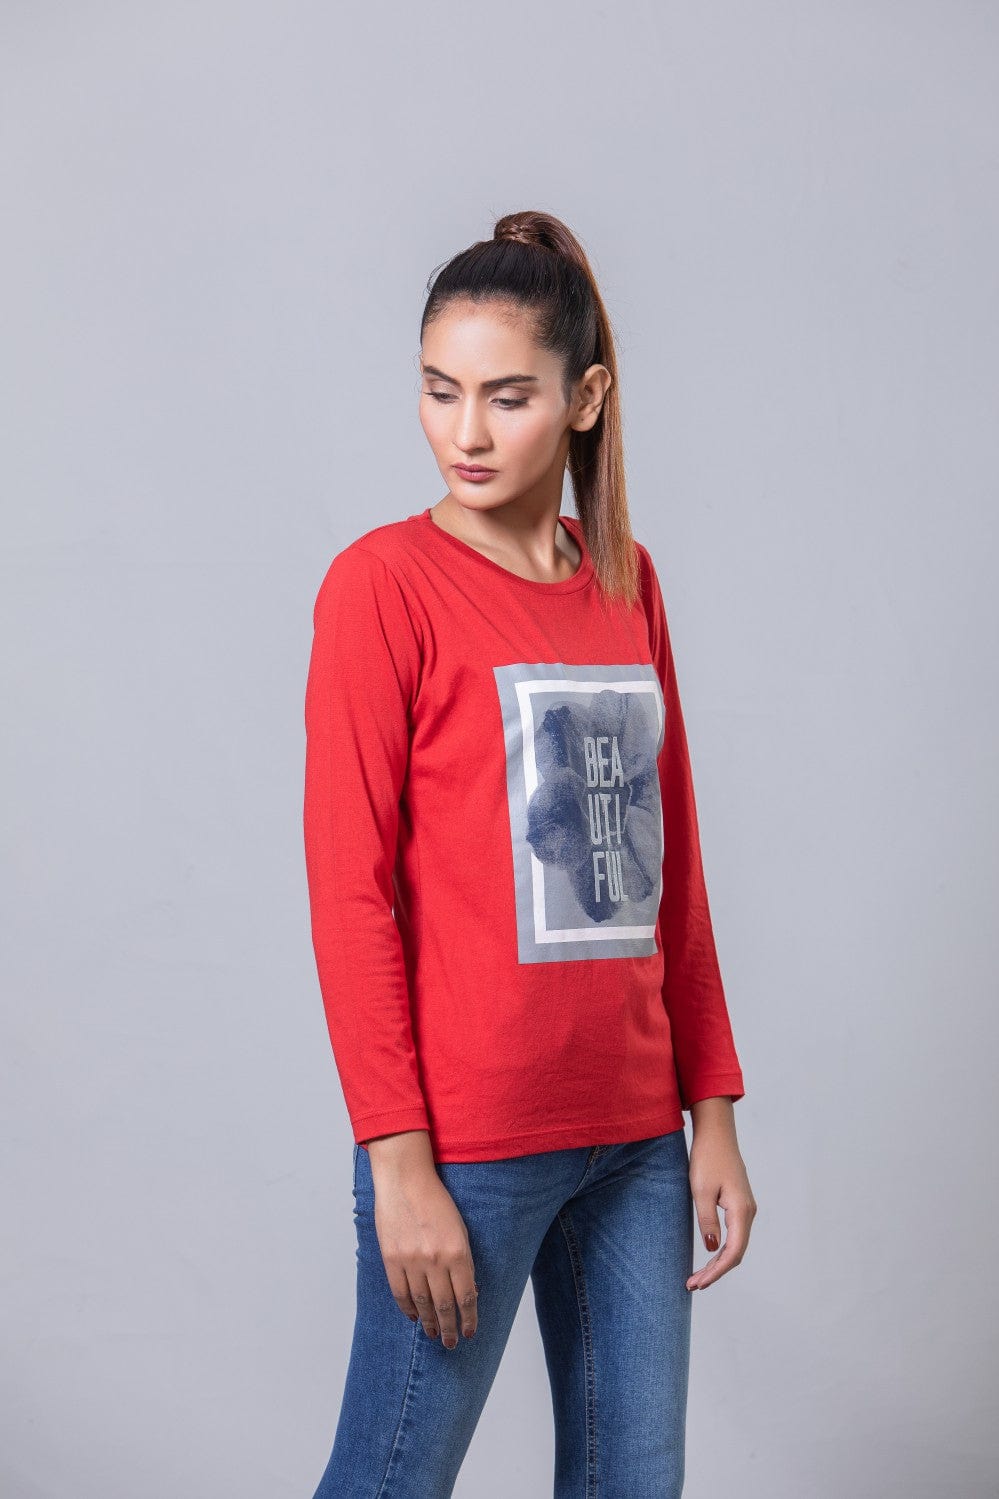 Hope Not Out by Shahid Afridi Women T-SHIRT Red T-Shirt HWKTF20006